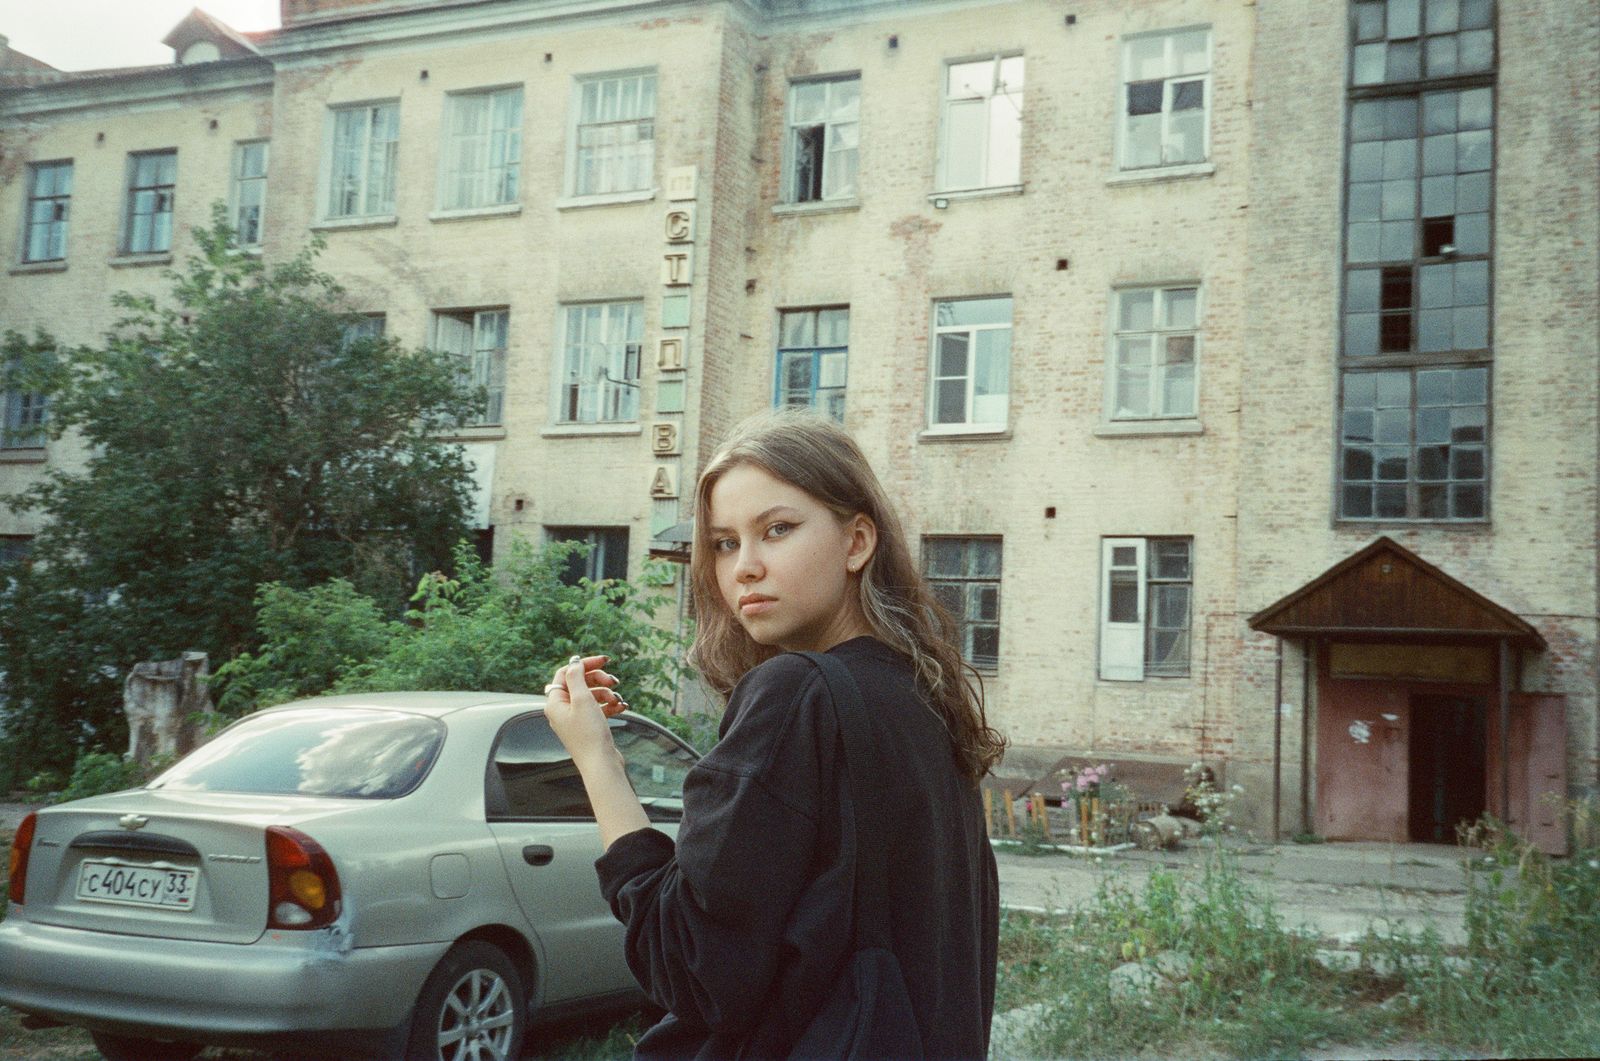 © Toma Gerzha - Anya and the house where her parents' apartment is located.